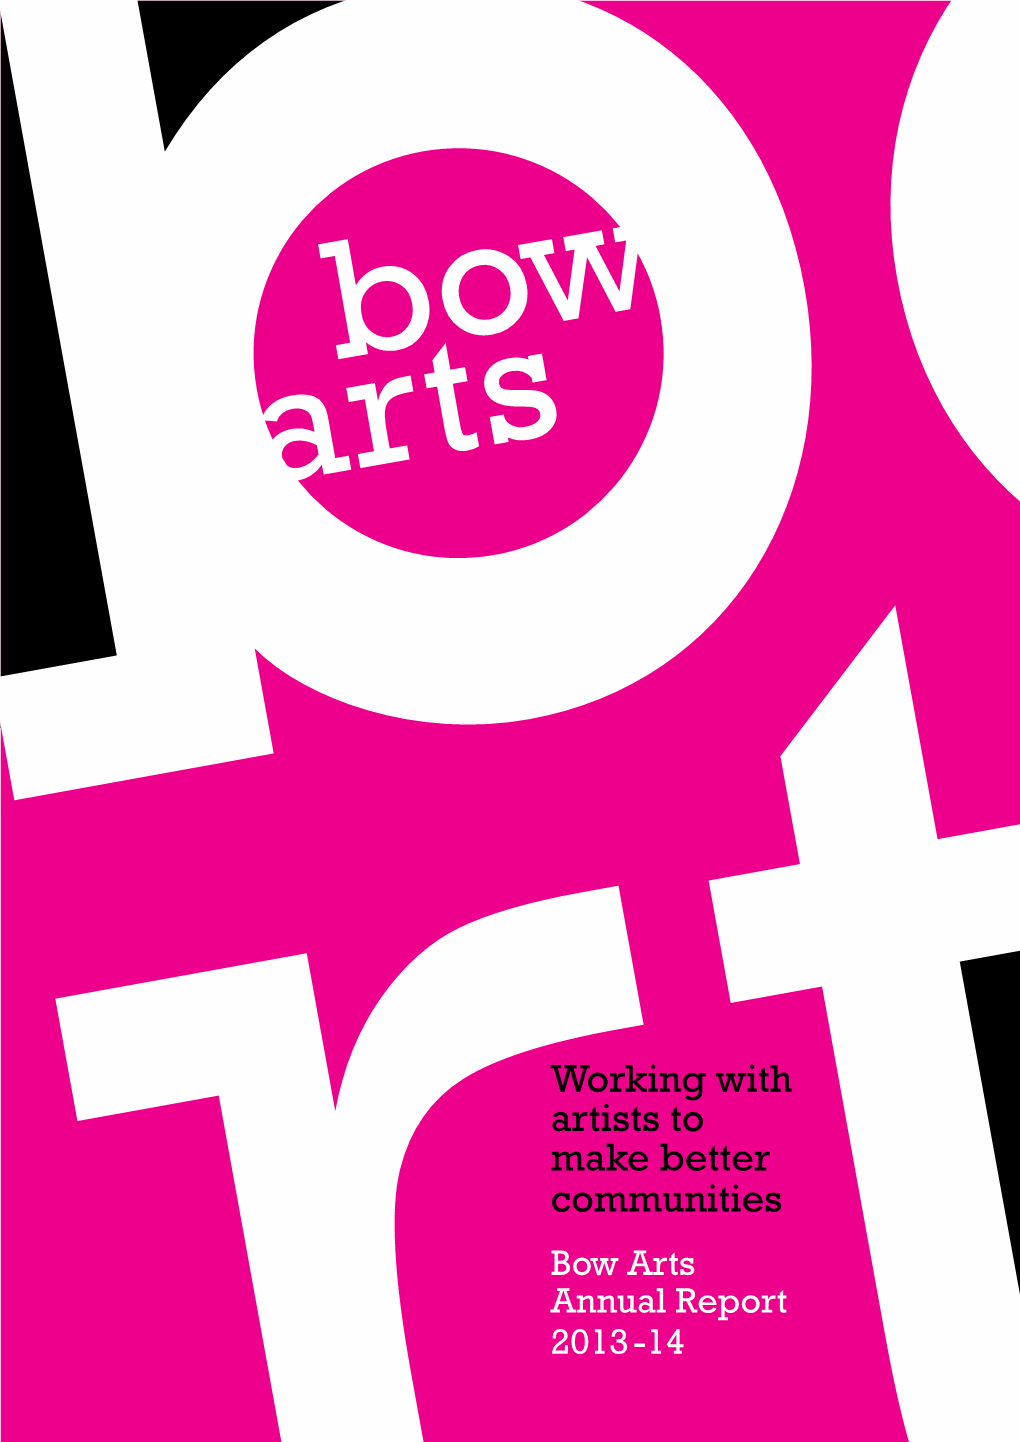 The Bow Arts Prize Arts Bow the Prize Arts Year of the Bow First the Worth Over in Total Prize Be a to £10,000 Has Proved Makinghuge Success